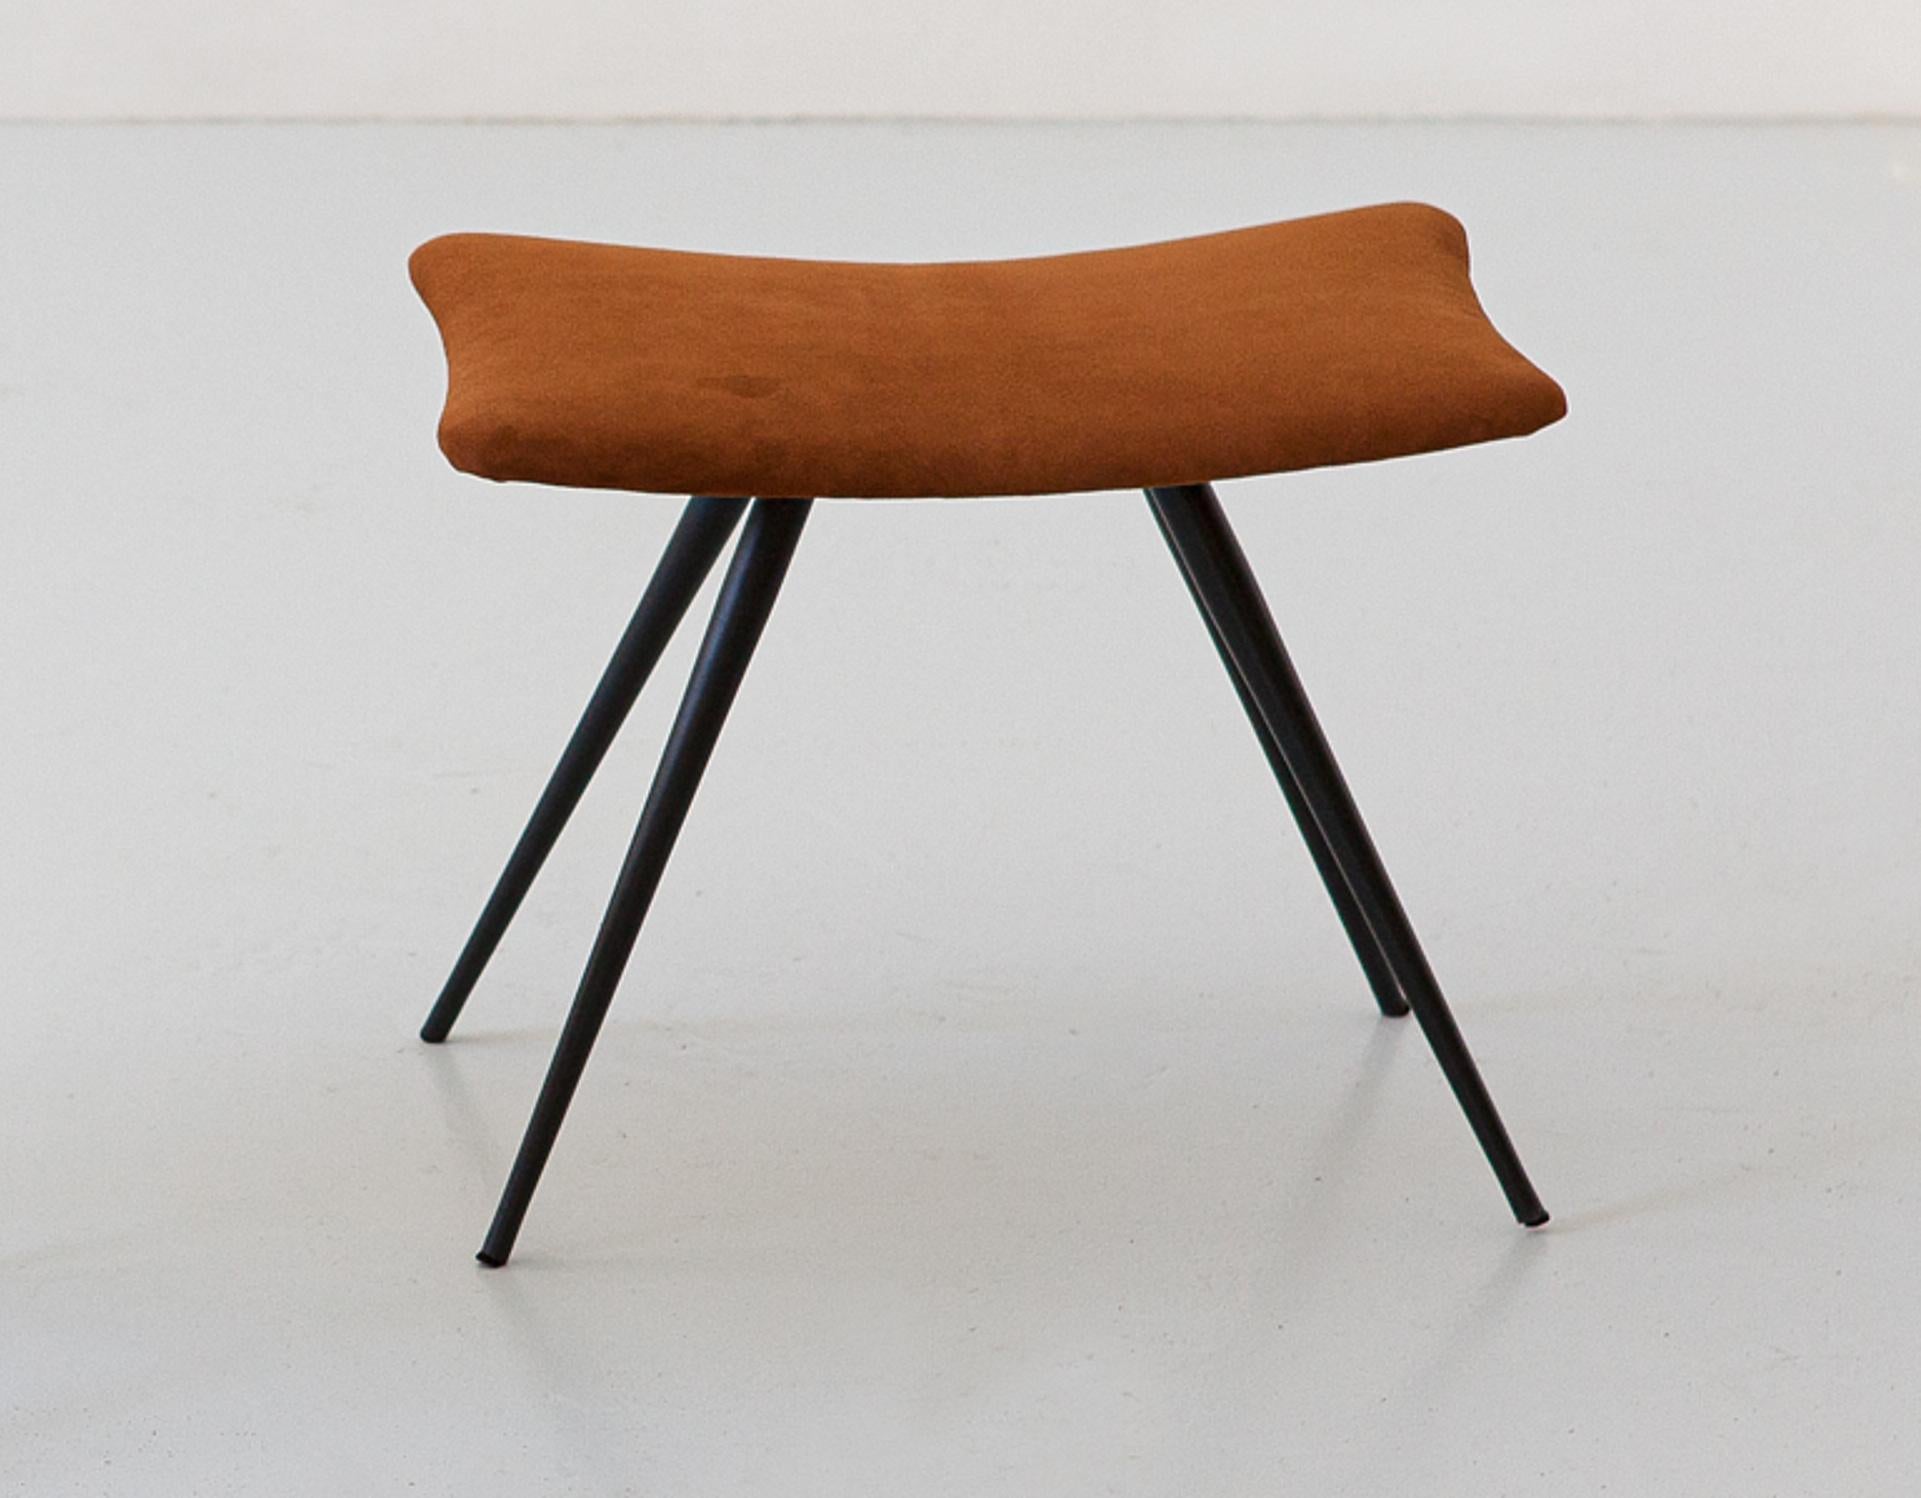 Italian Stool in Cognac Suede Leather and Black Steel Conical Legs, 1950s In Good Condition For Sale In Rome, IT